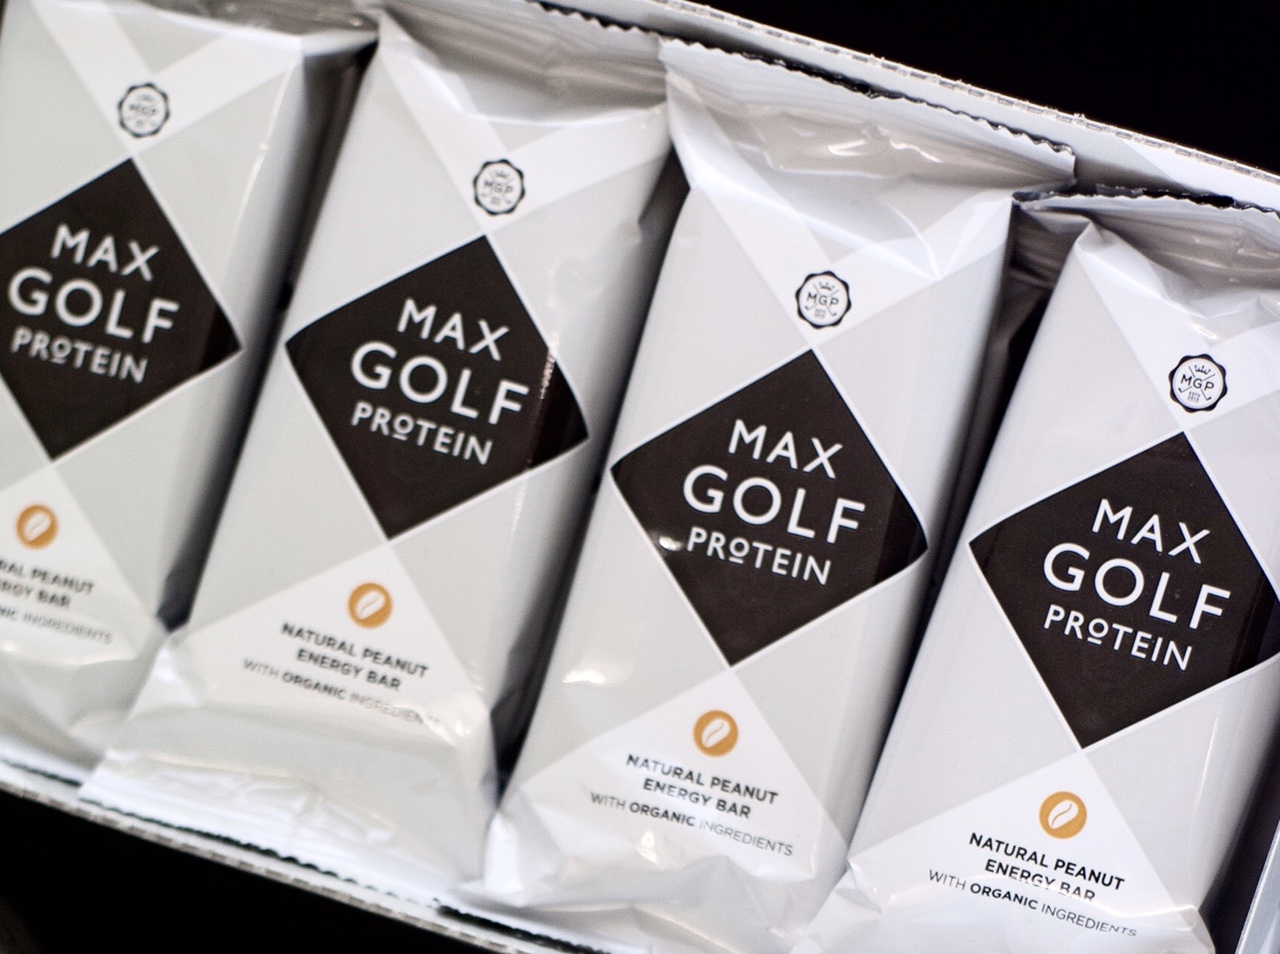 Max Golf Protein Bar – Completely Corporate